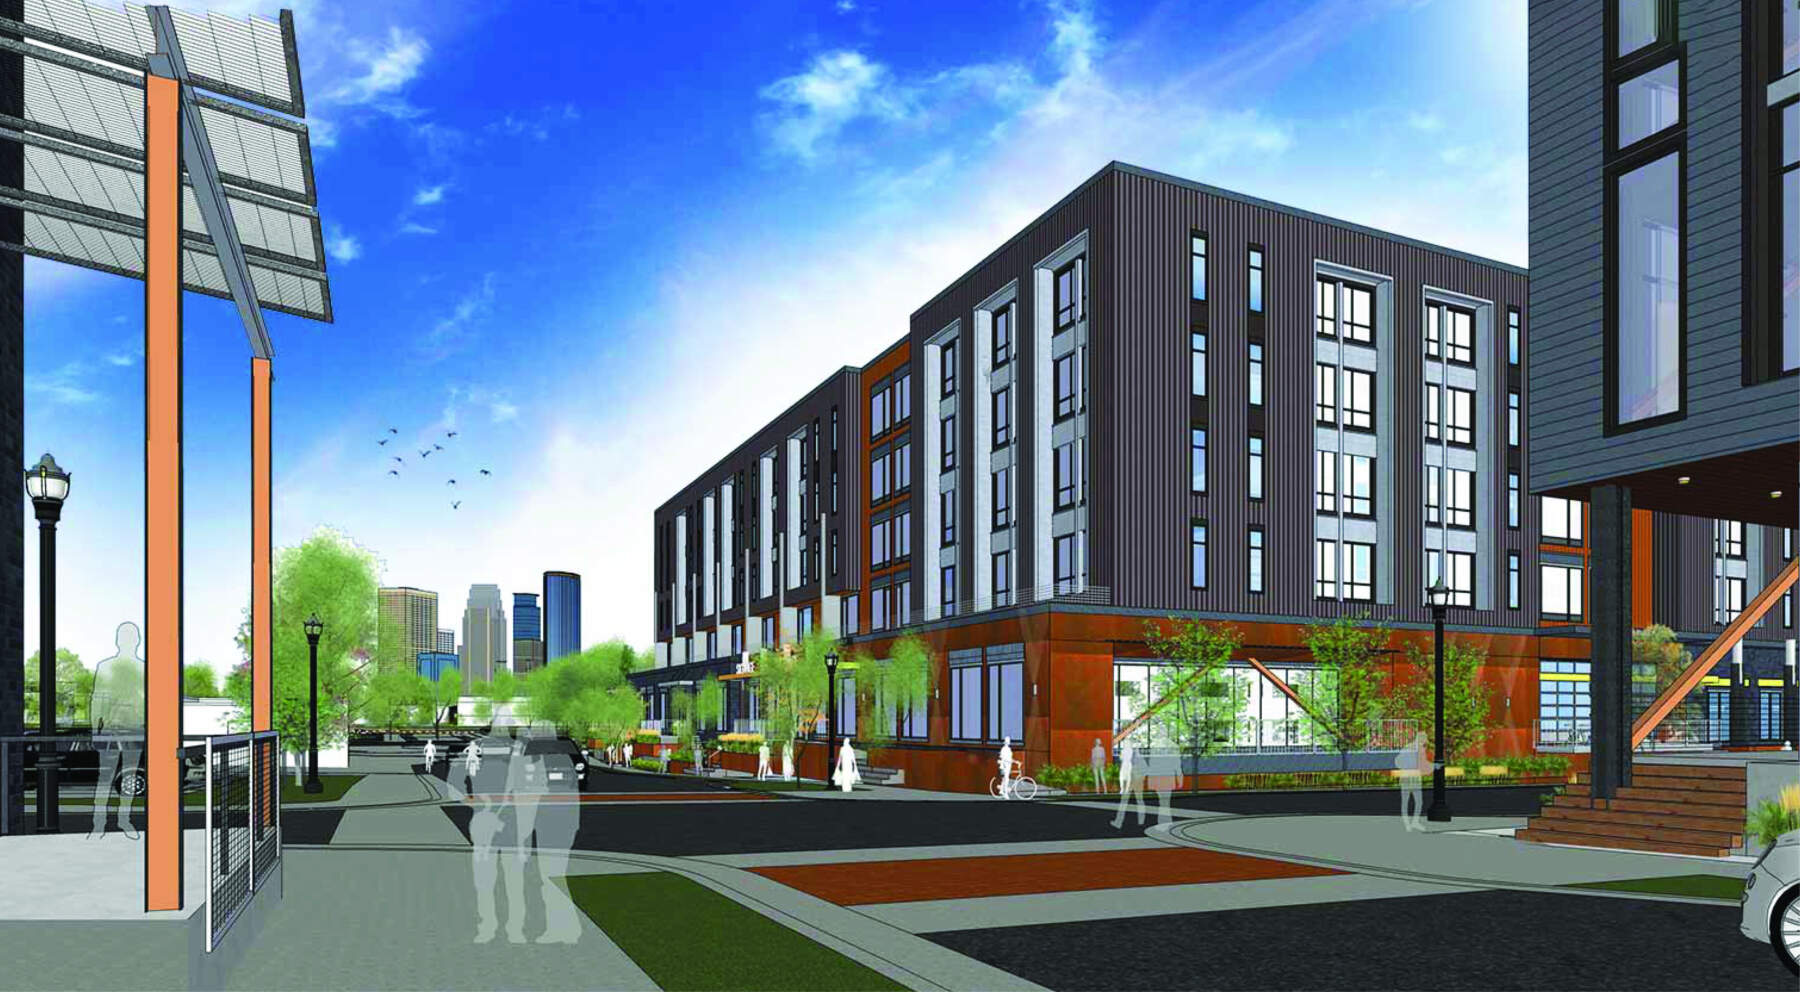 Currie Commons Rendering 2 text removed